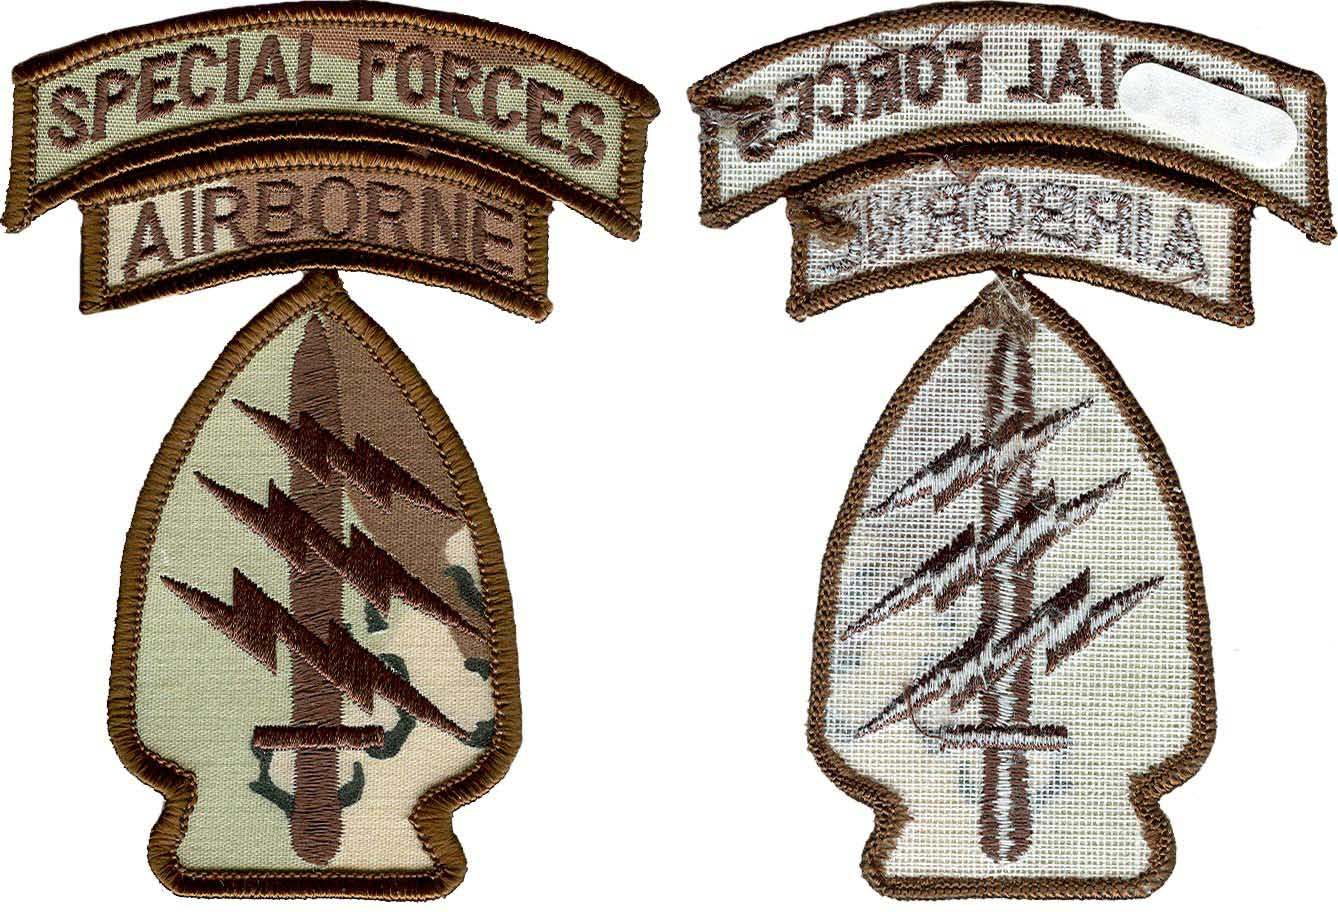 interesting USACAPOC patches - ARMY AND USAAF - U.S. Militaria Forum